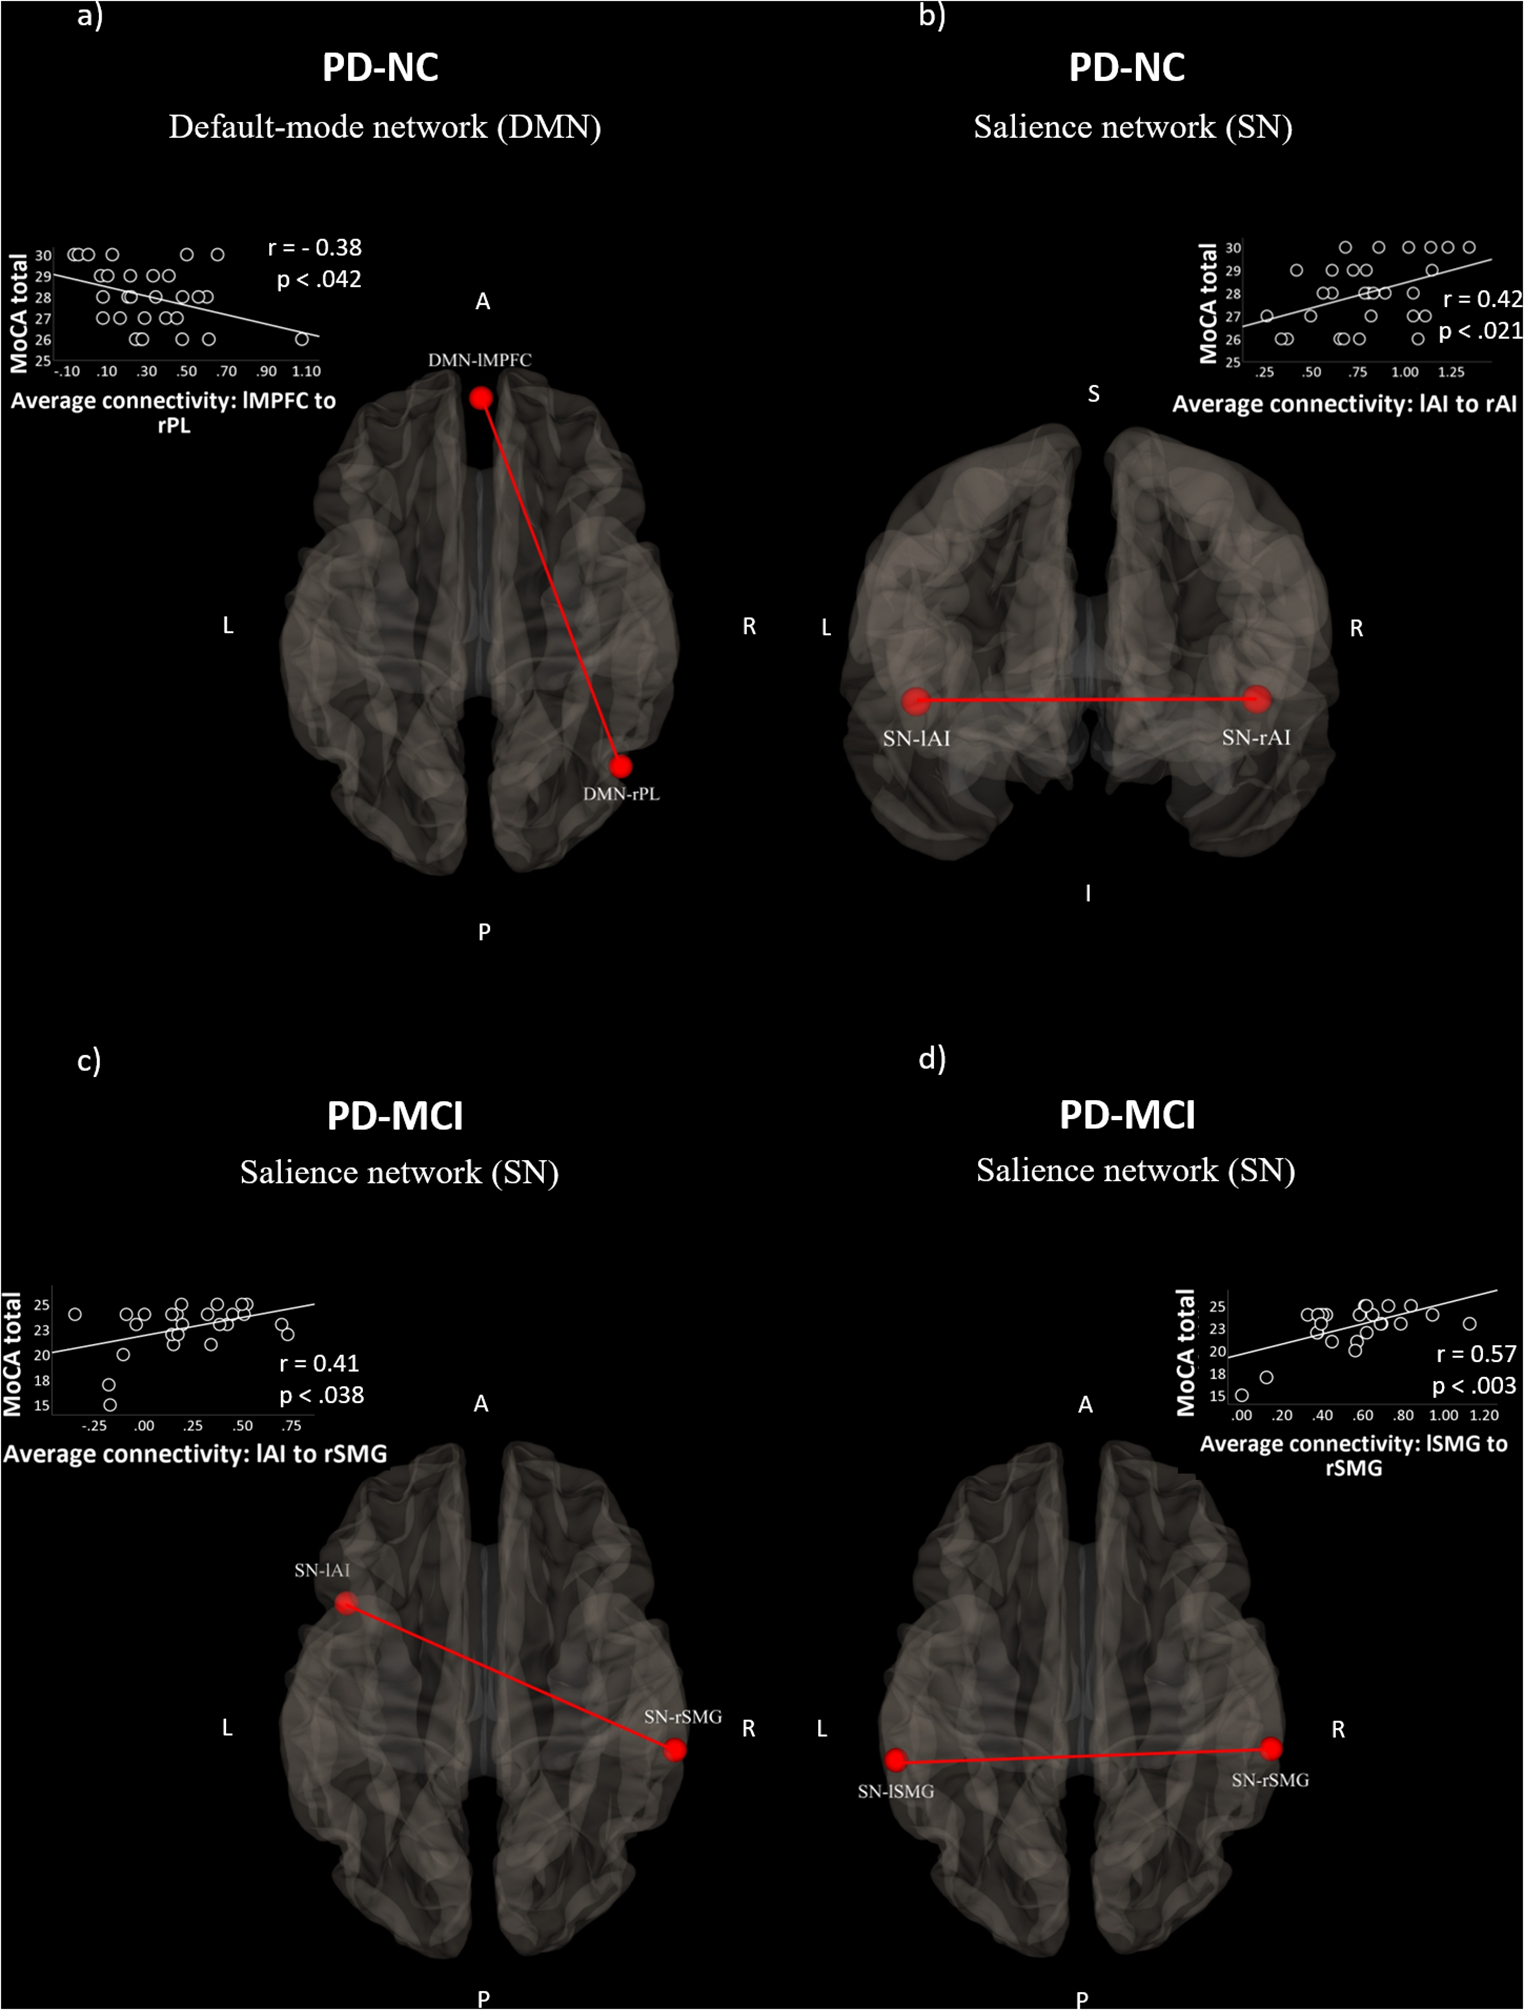 Resting-state networks and their relationship with MoCA performance in PD patients